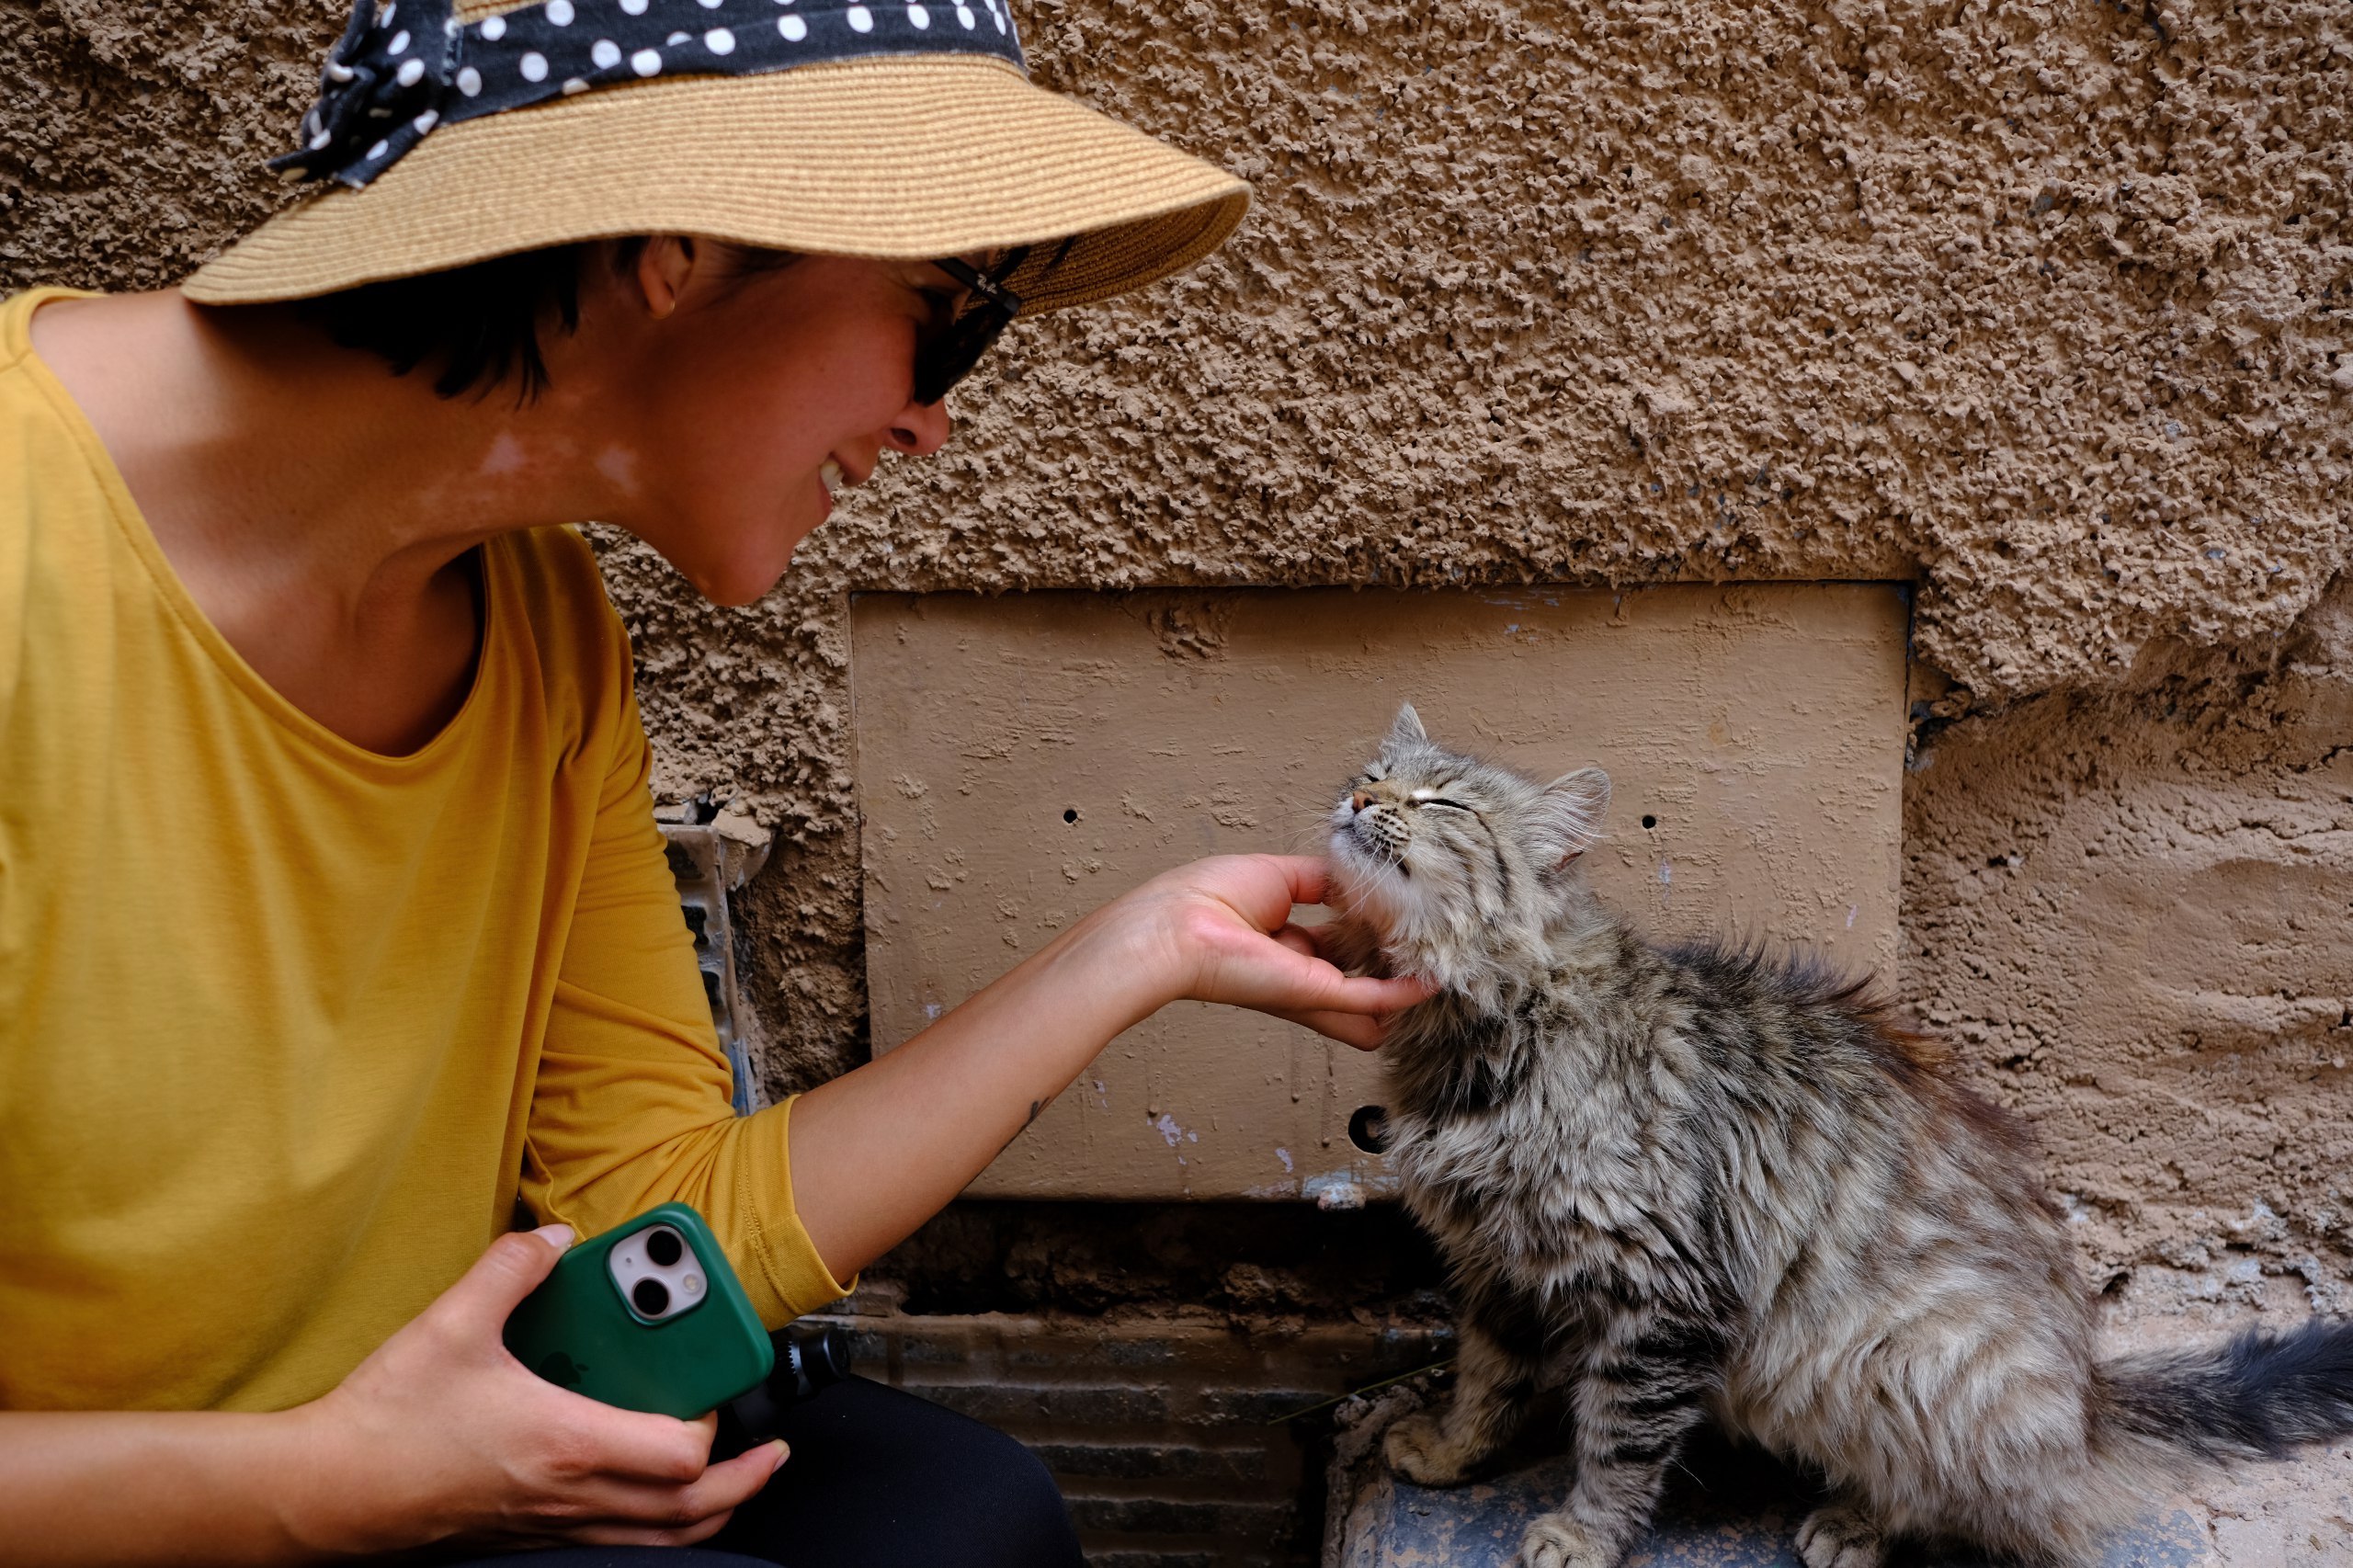 Me playing with a cat I found in Morocco.